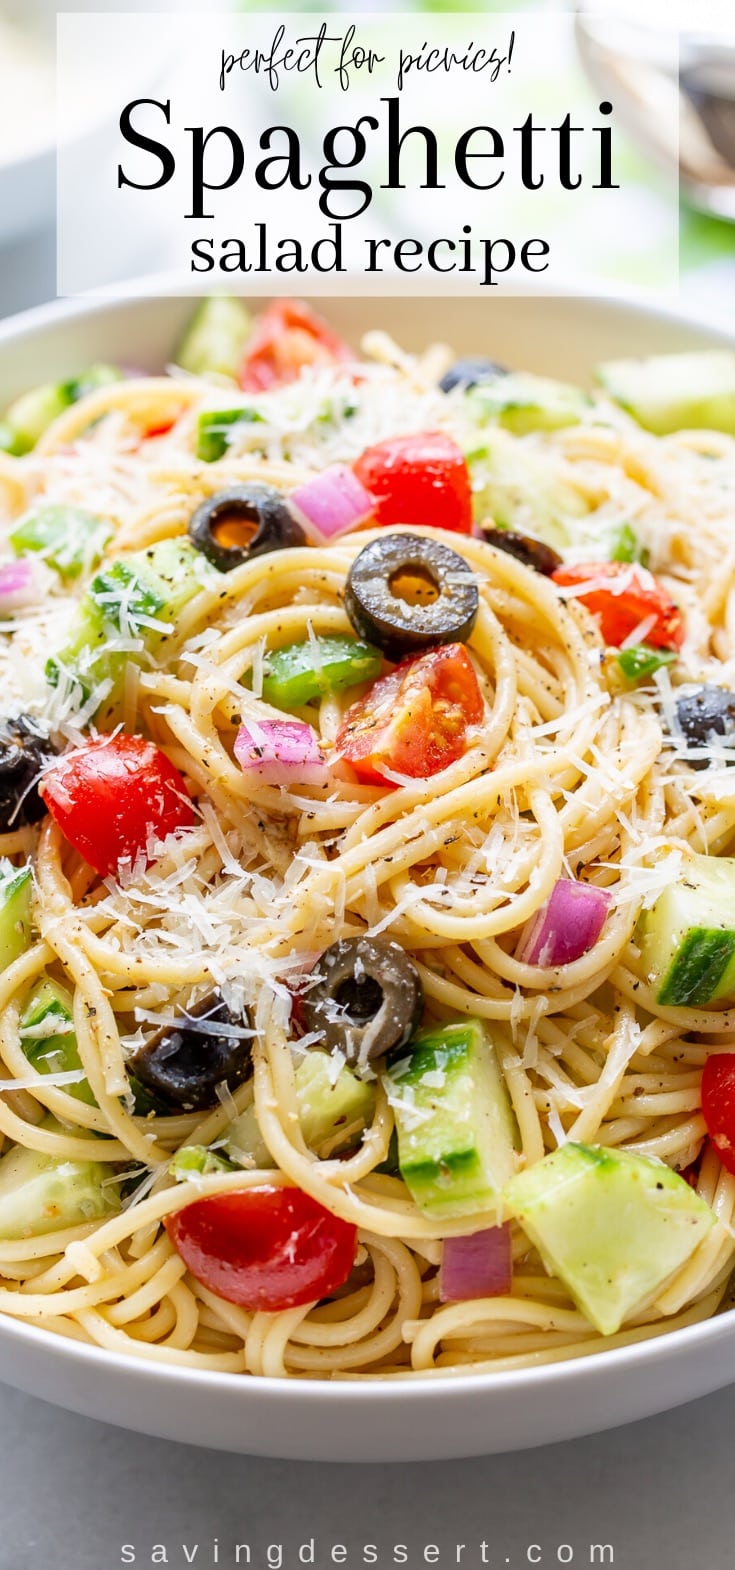 A bowl of spaghetti with red onion, olives, cucumbers and tomatoes tossed in an Italian dressing